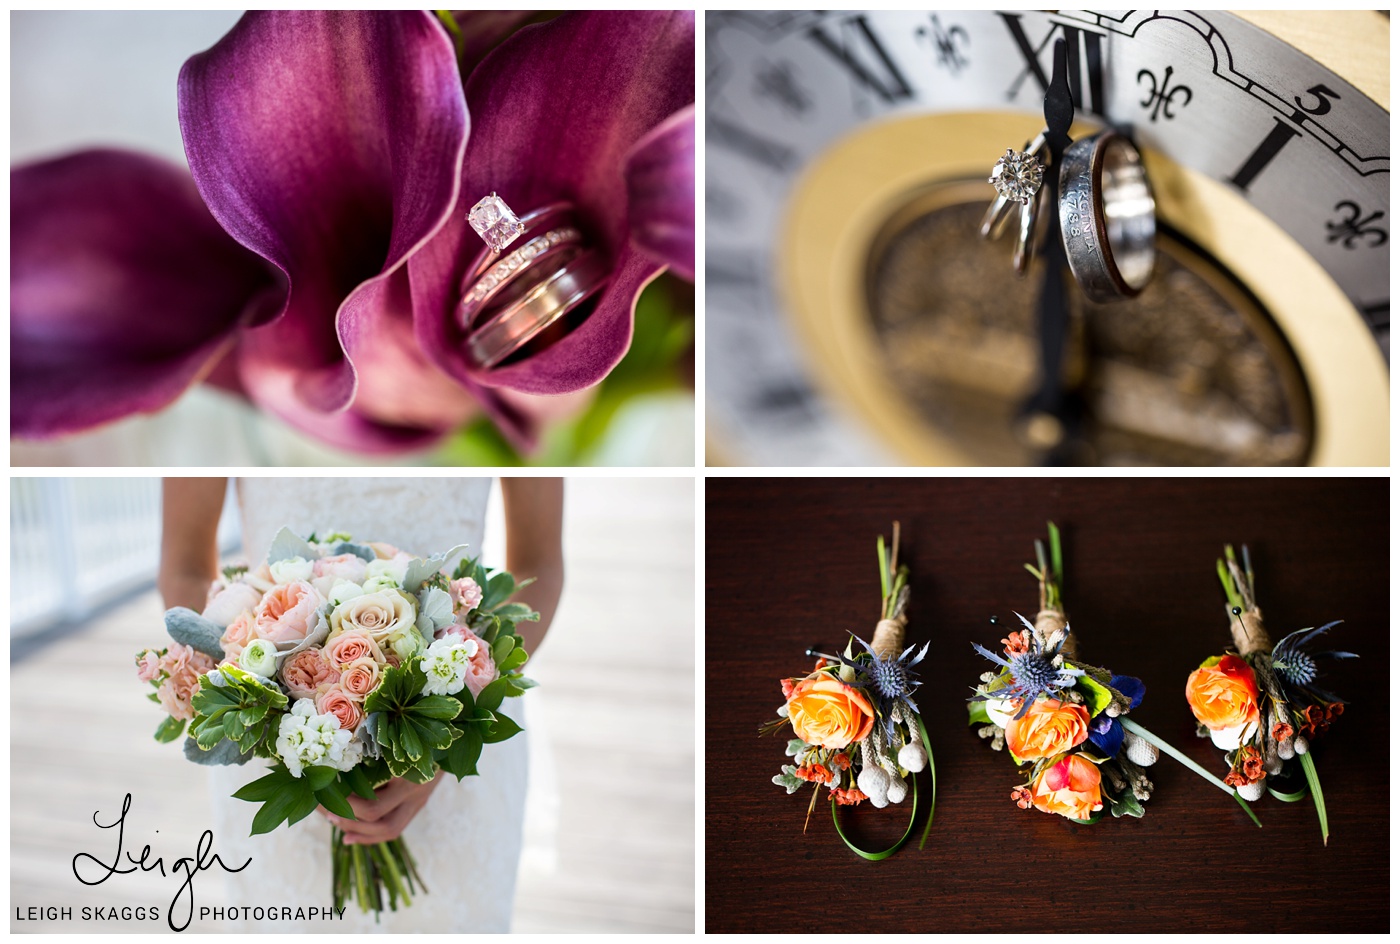 Ask the Experts | Leigh Skaggs Photography